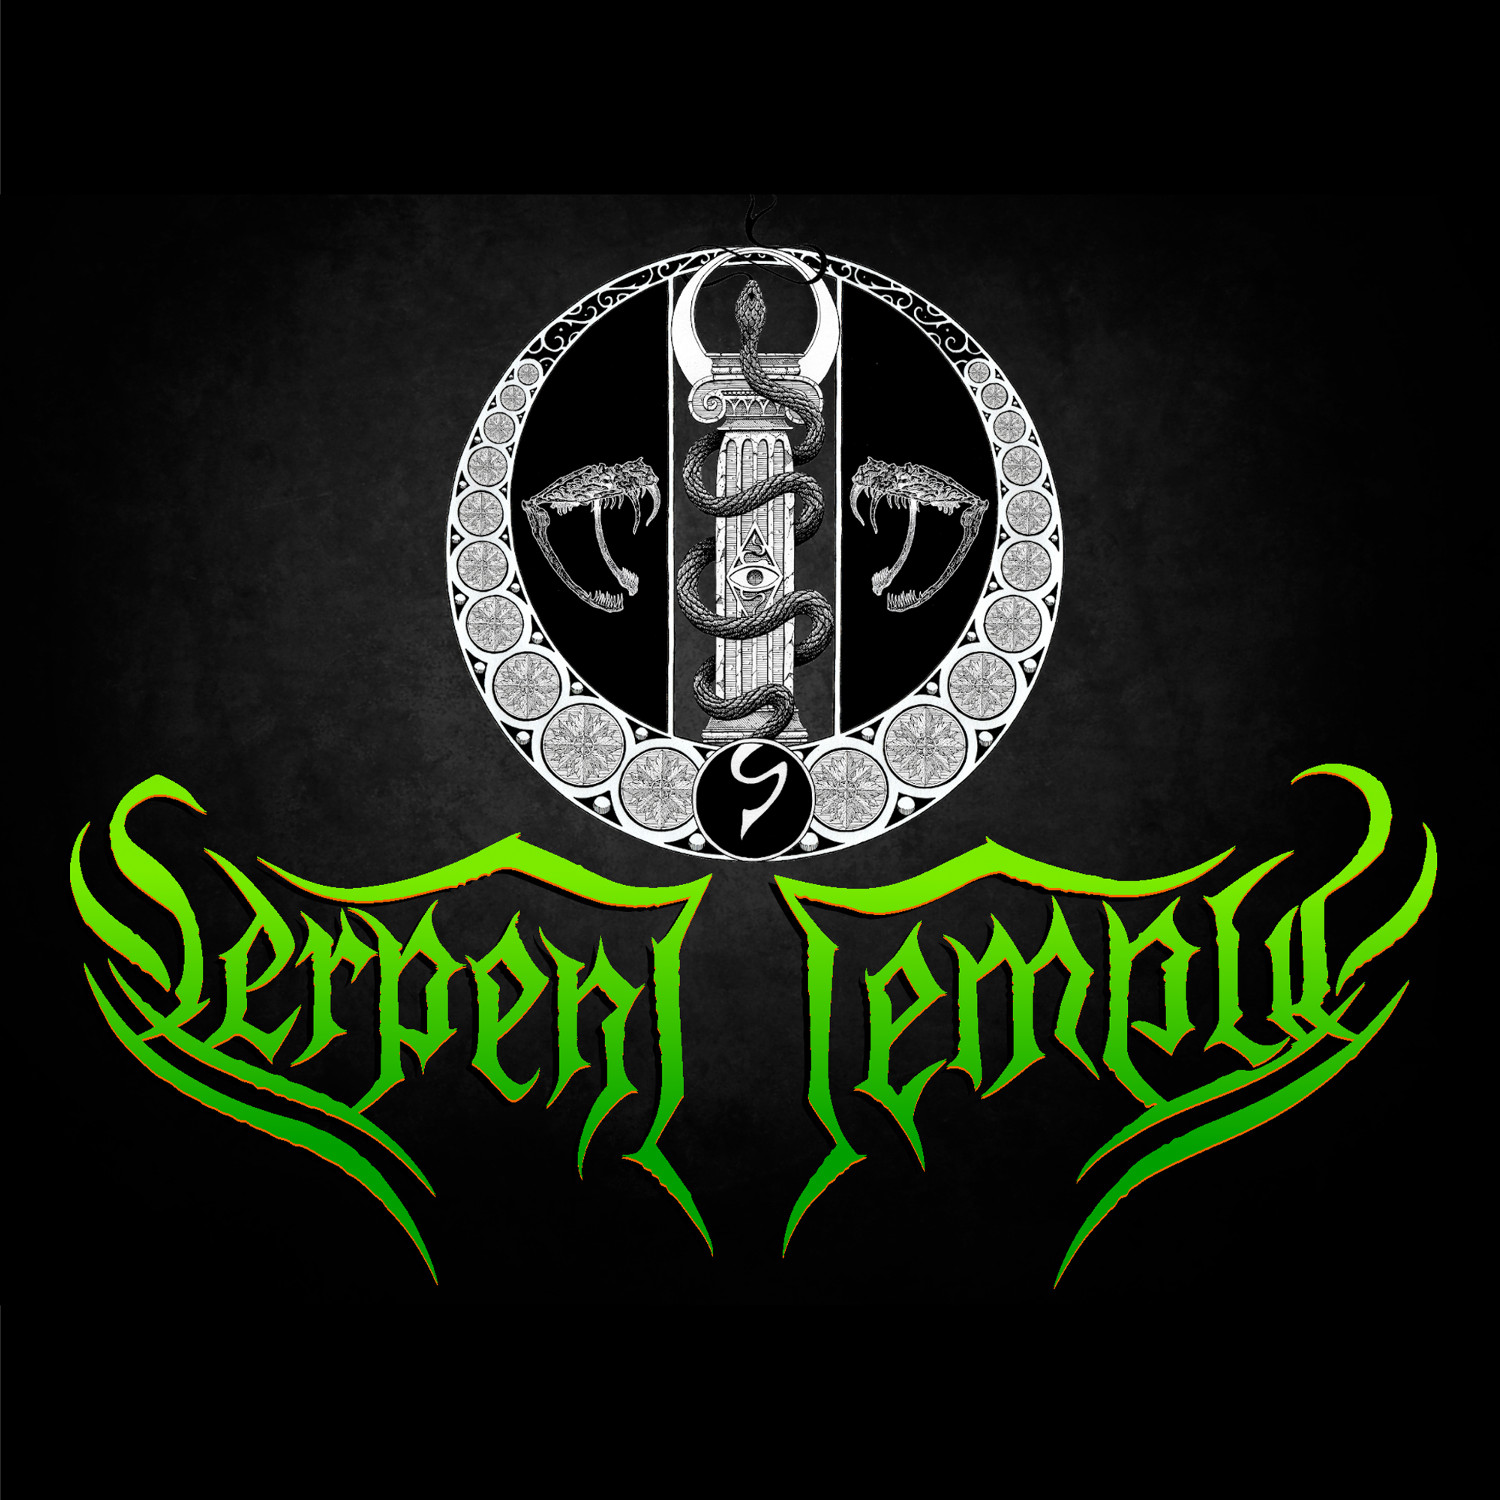 Show artwork for Serpent Temple